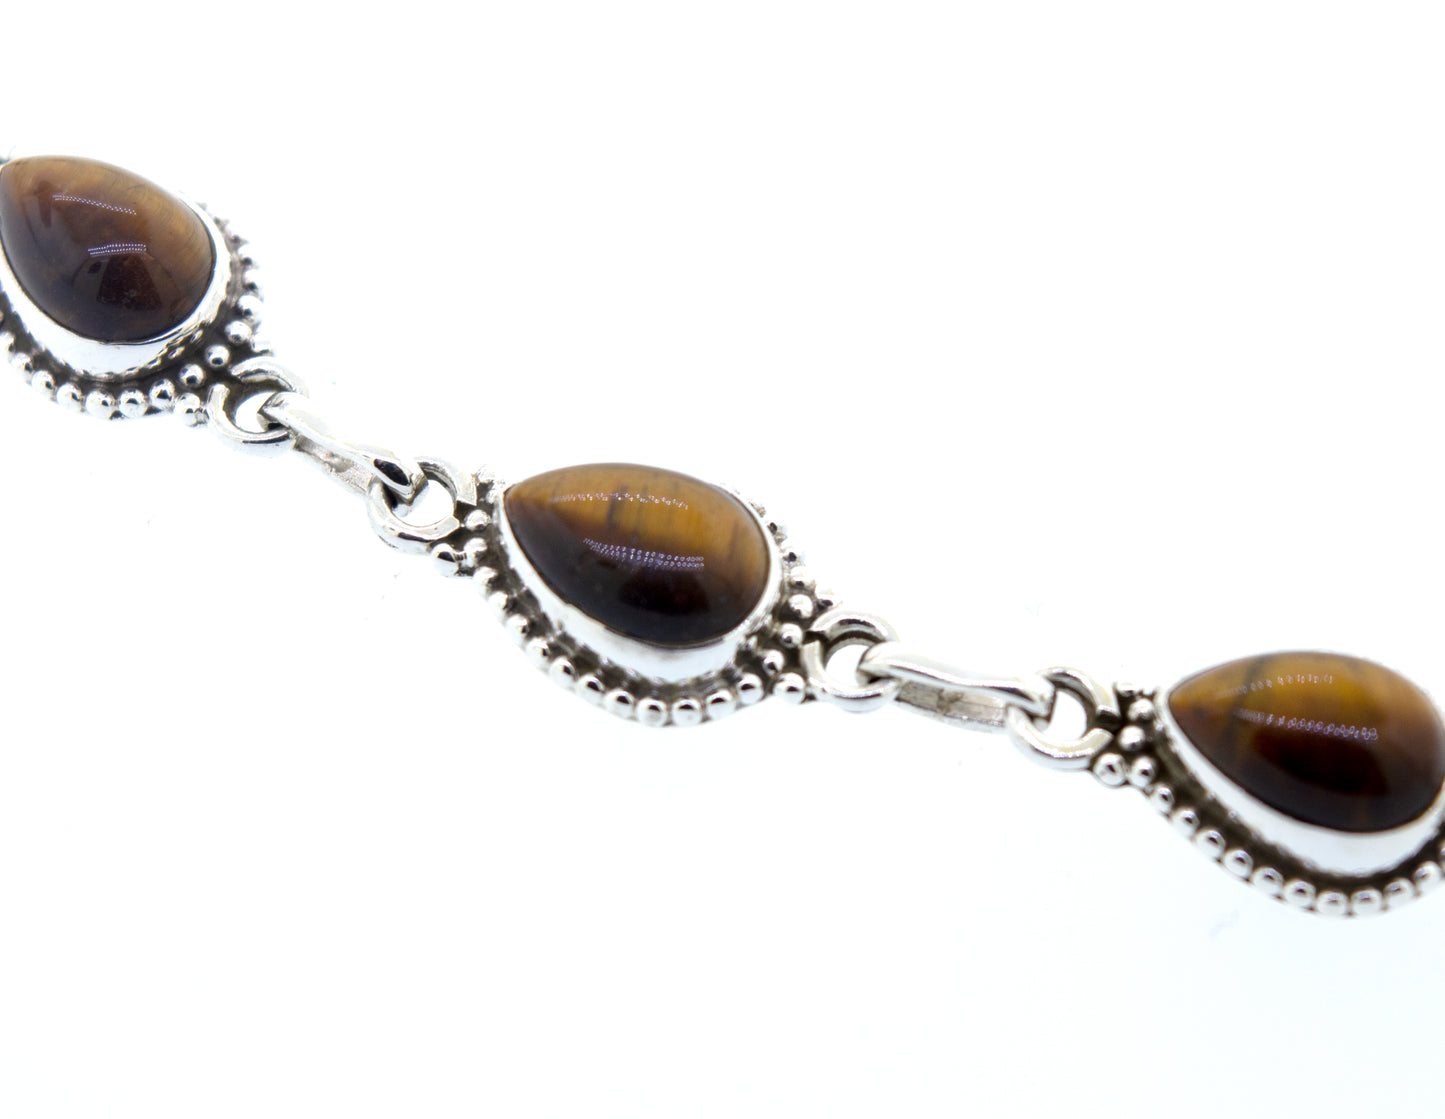 A vibrant Super Silver Teardrop Shape Tiger's Eye Bracelet With Ball Border adorned with tiger's eye stones.